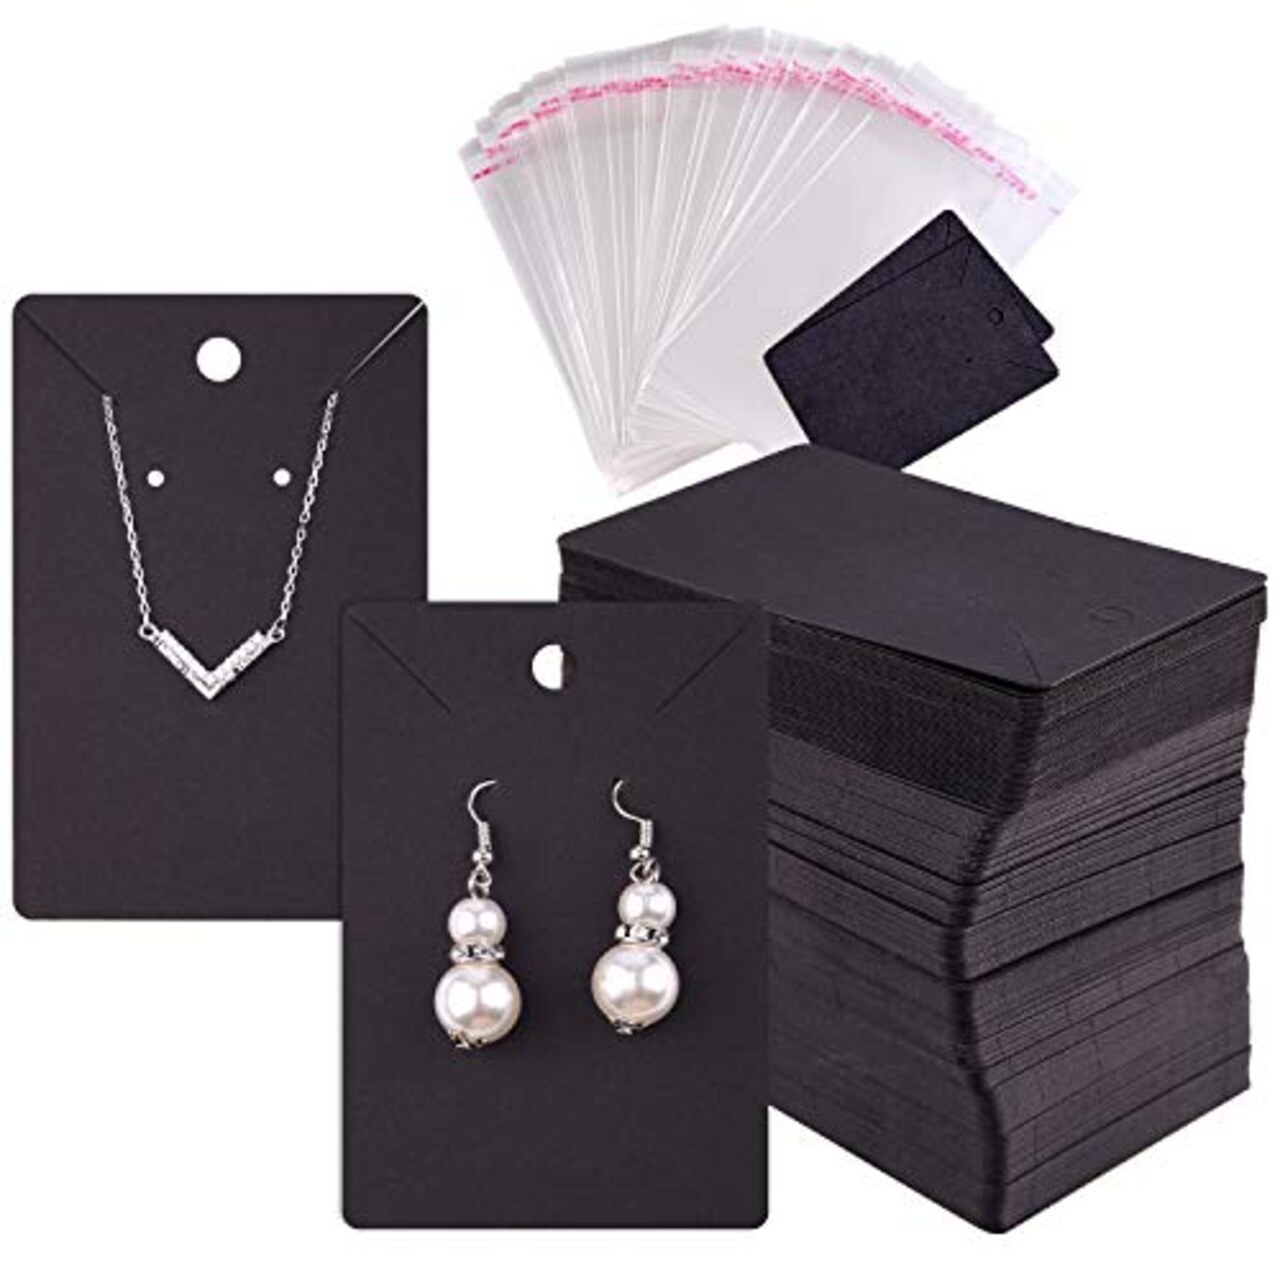 TUPARKA 120 Pcs Earring Display Card, Necklace Display Cards with120Pcs  Self-Seal Bags,Earring Card Holder Blank Kraft Paper Tags for DIY Ear Studs  and Earrings,3.5 x 2 Inches